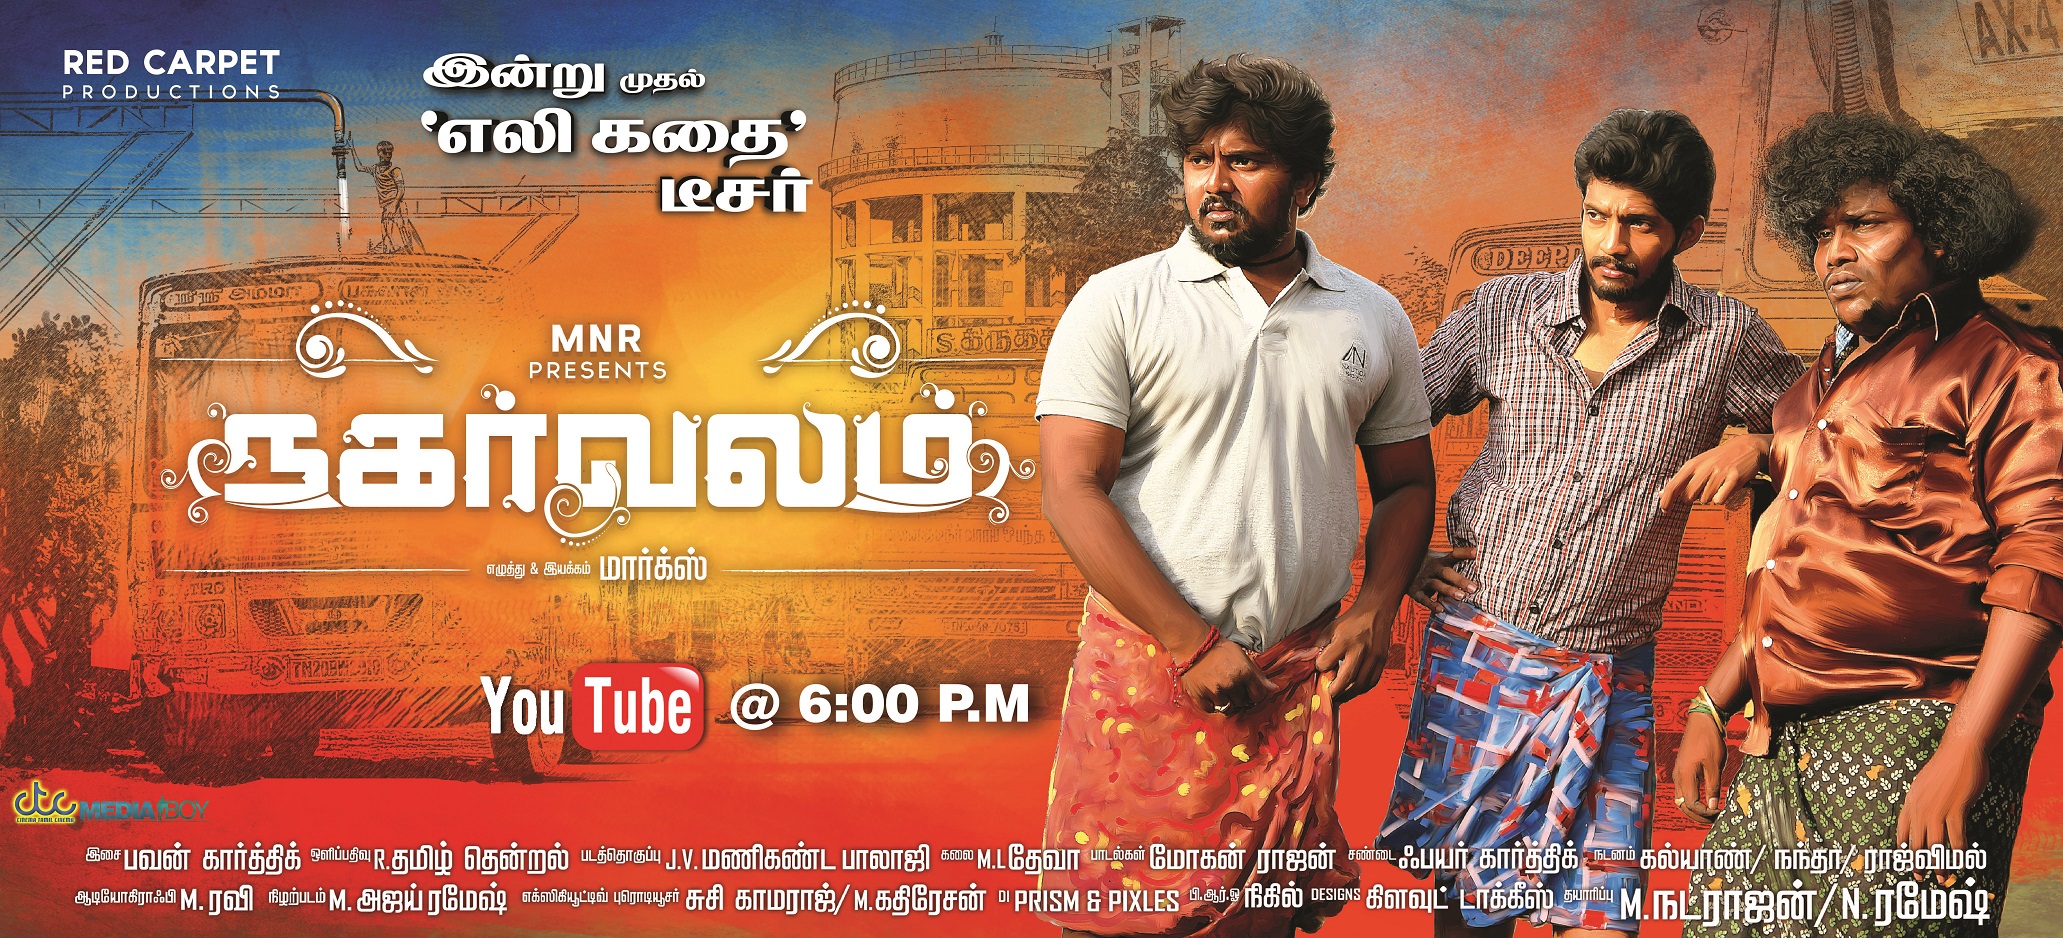 Nagarvalam Movie Teaser from Today Poster